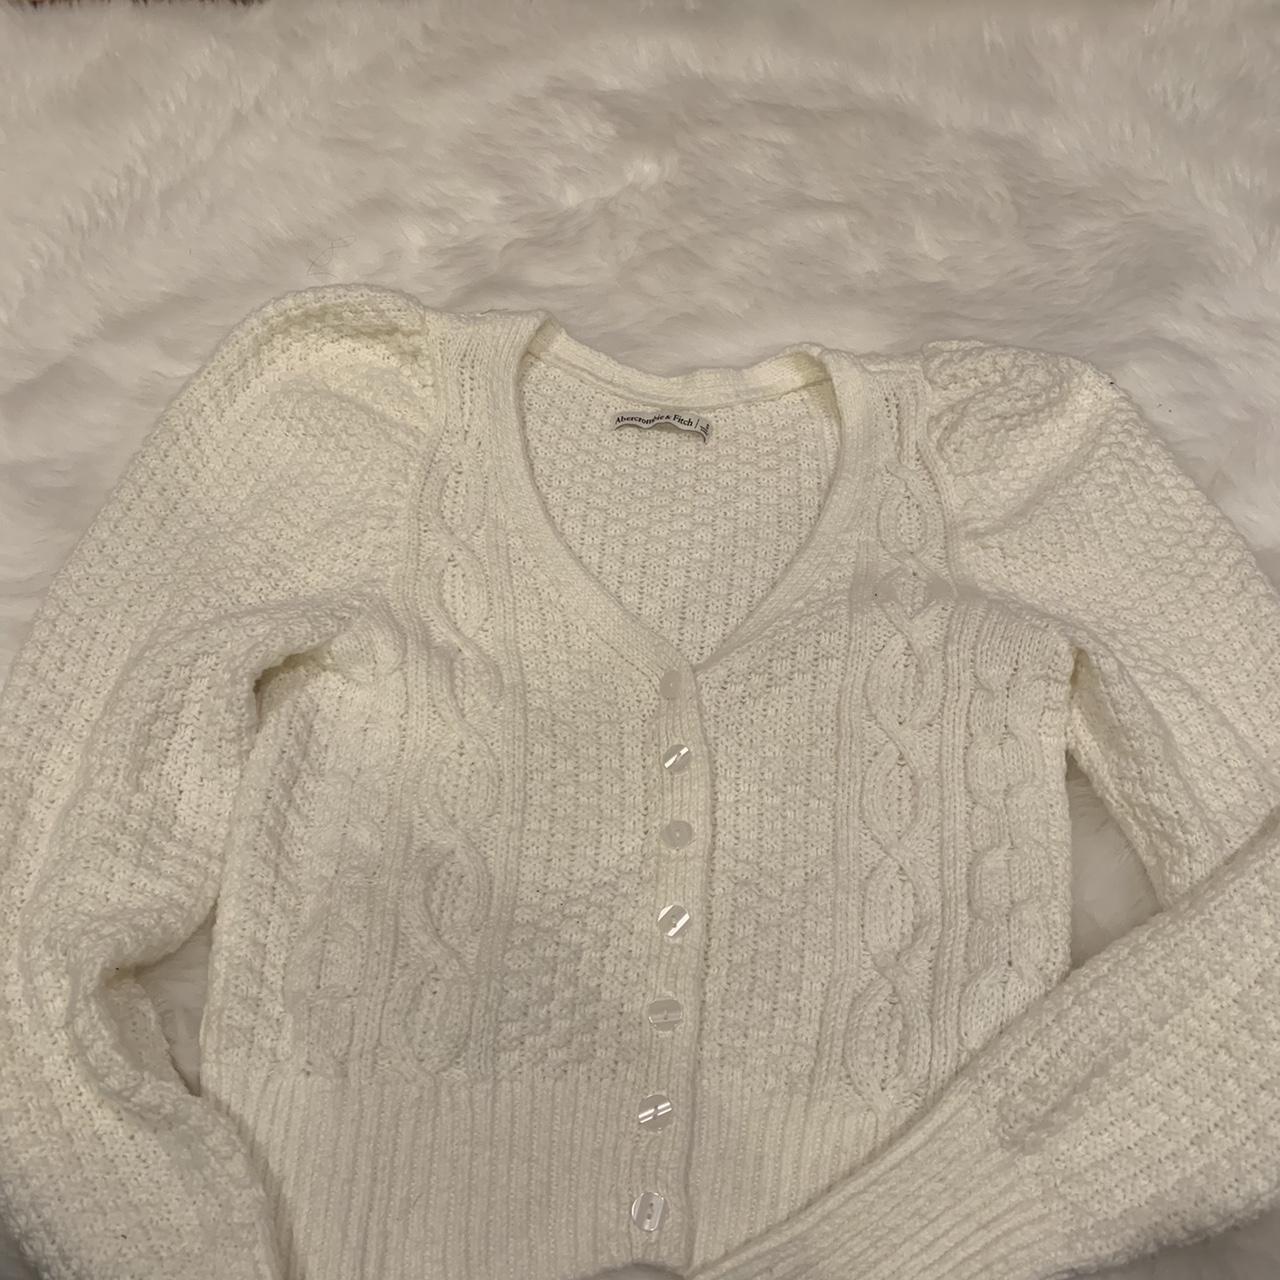 Abercrombie & Fitch Women's Cream and White Jumper